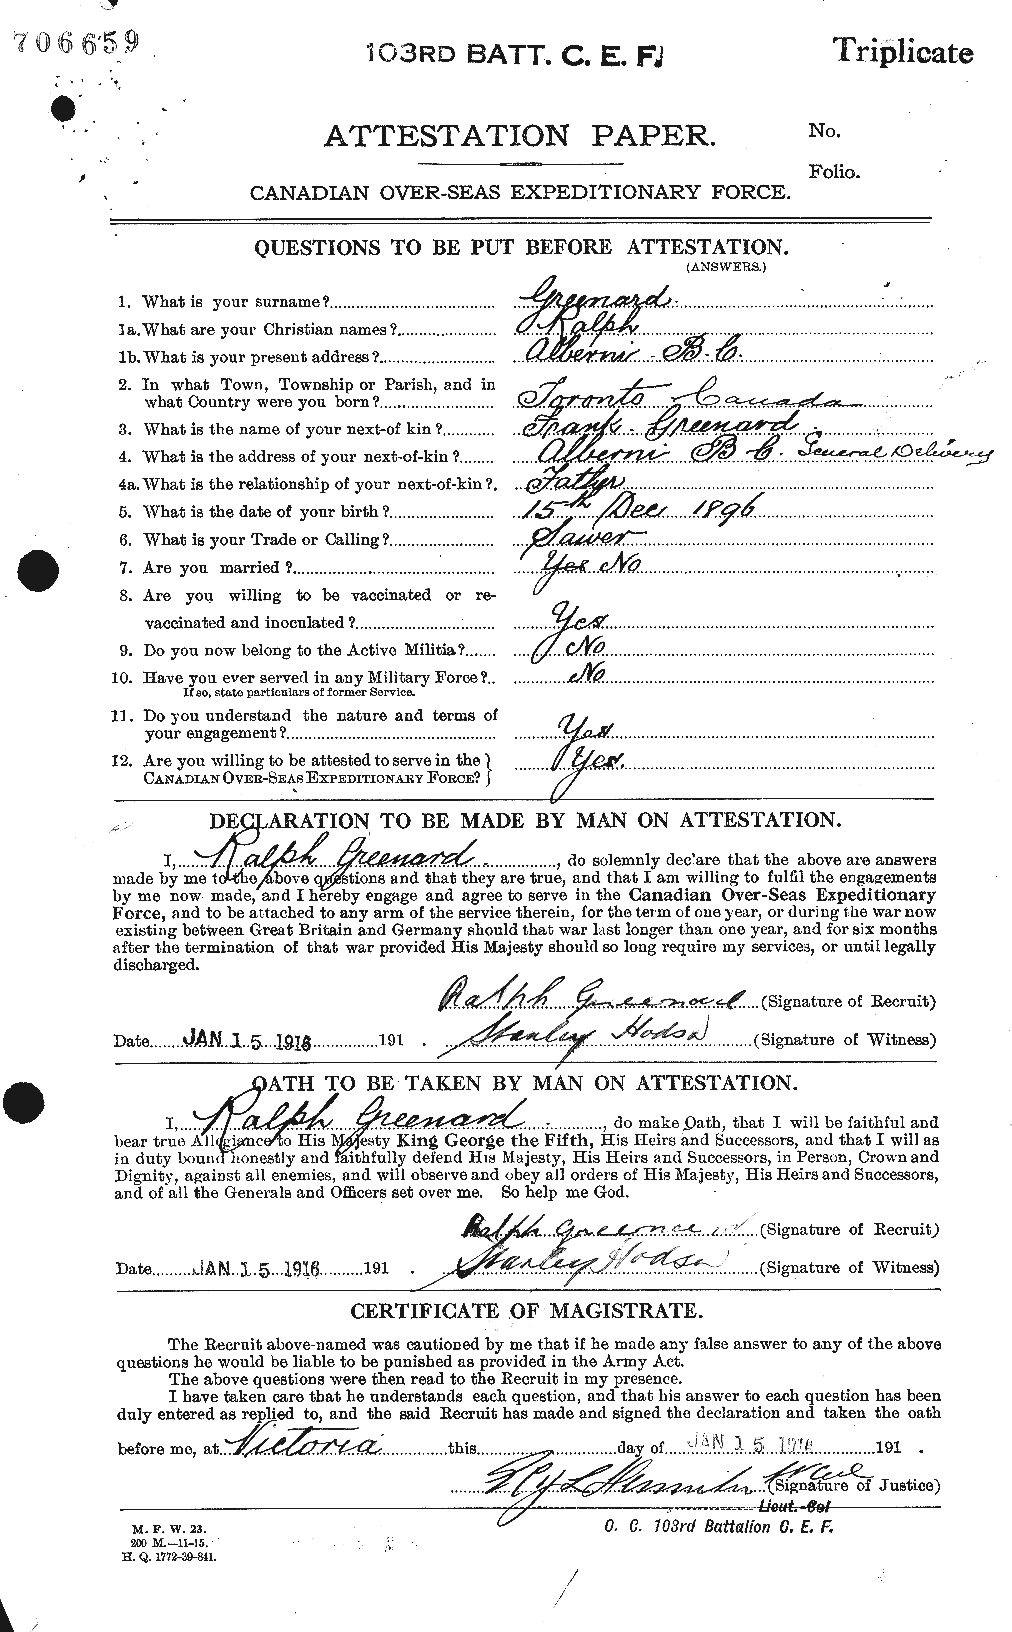 Personnel Records of the First World War - CEF 362303a